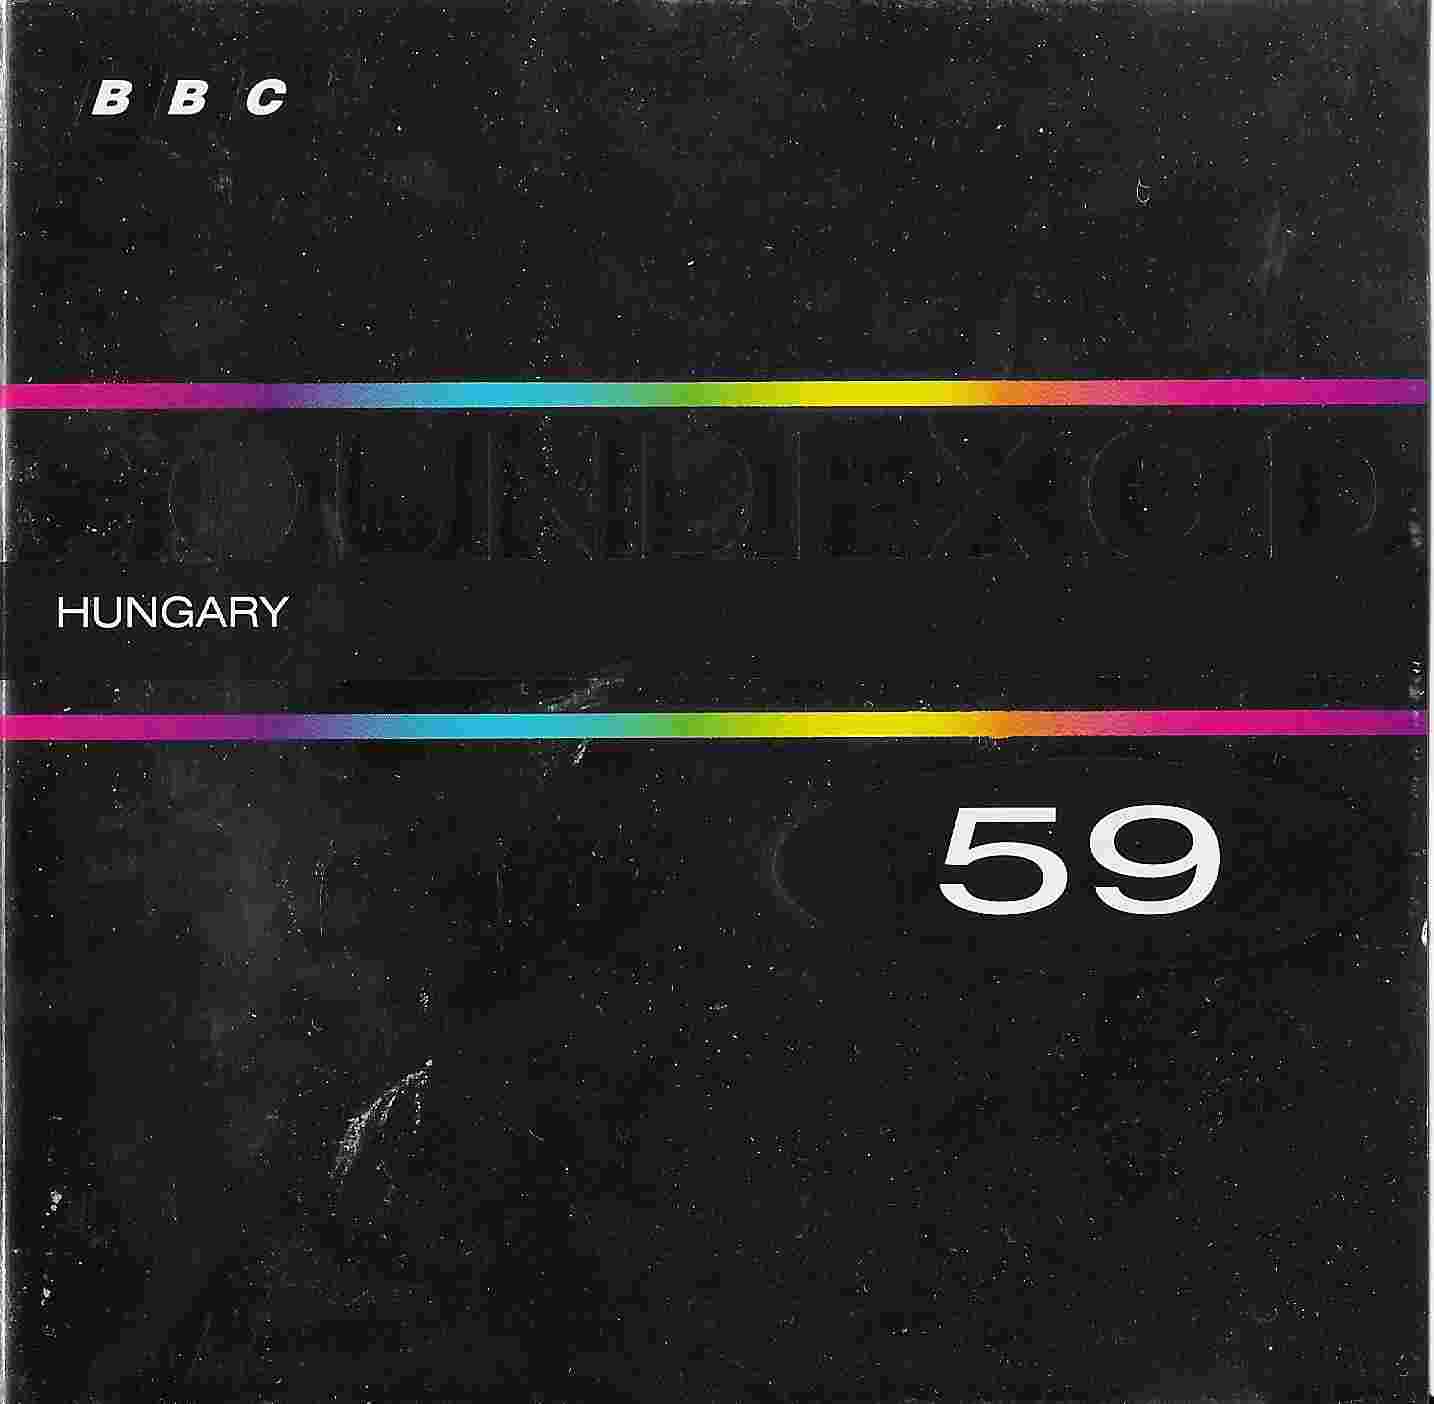 Picture of BBCCD SFX059 Hungary by artist Various from the BBC cds - Records and Tapes library